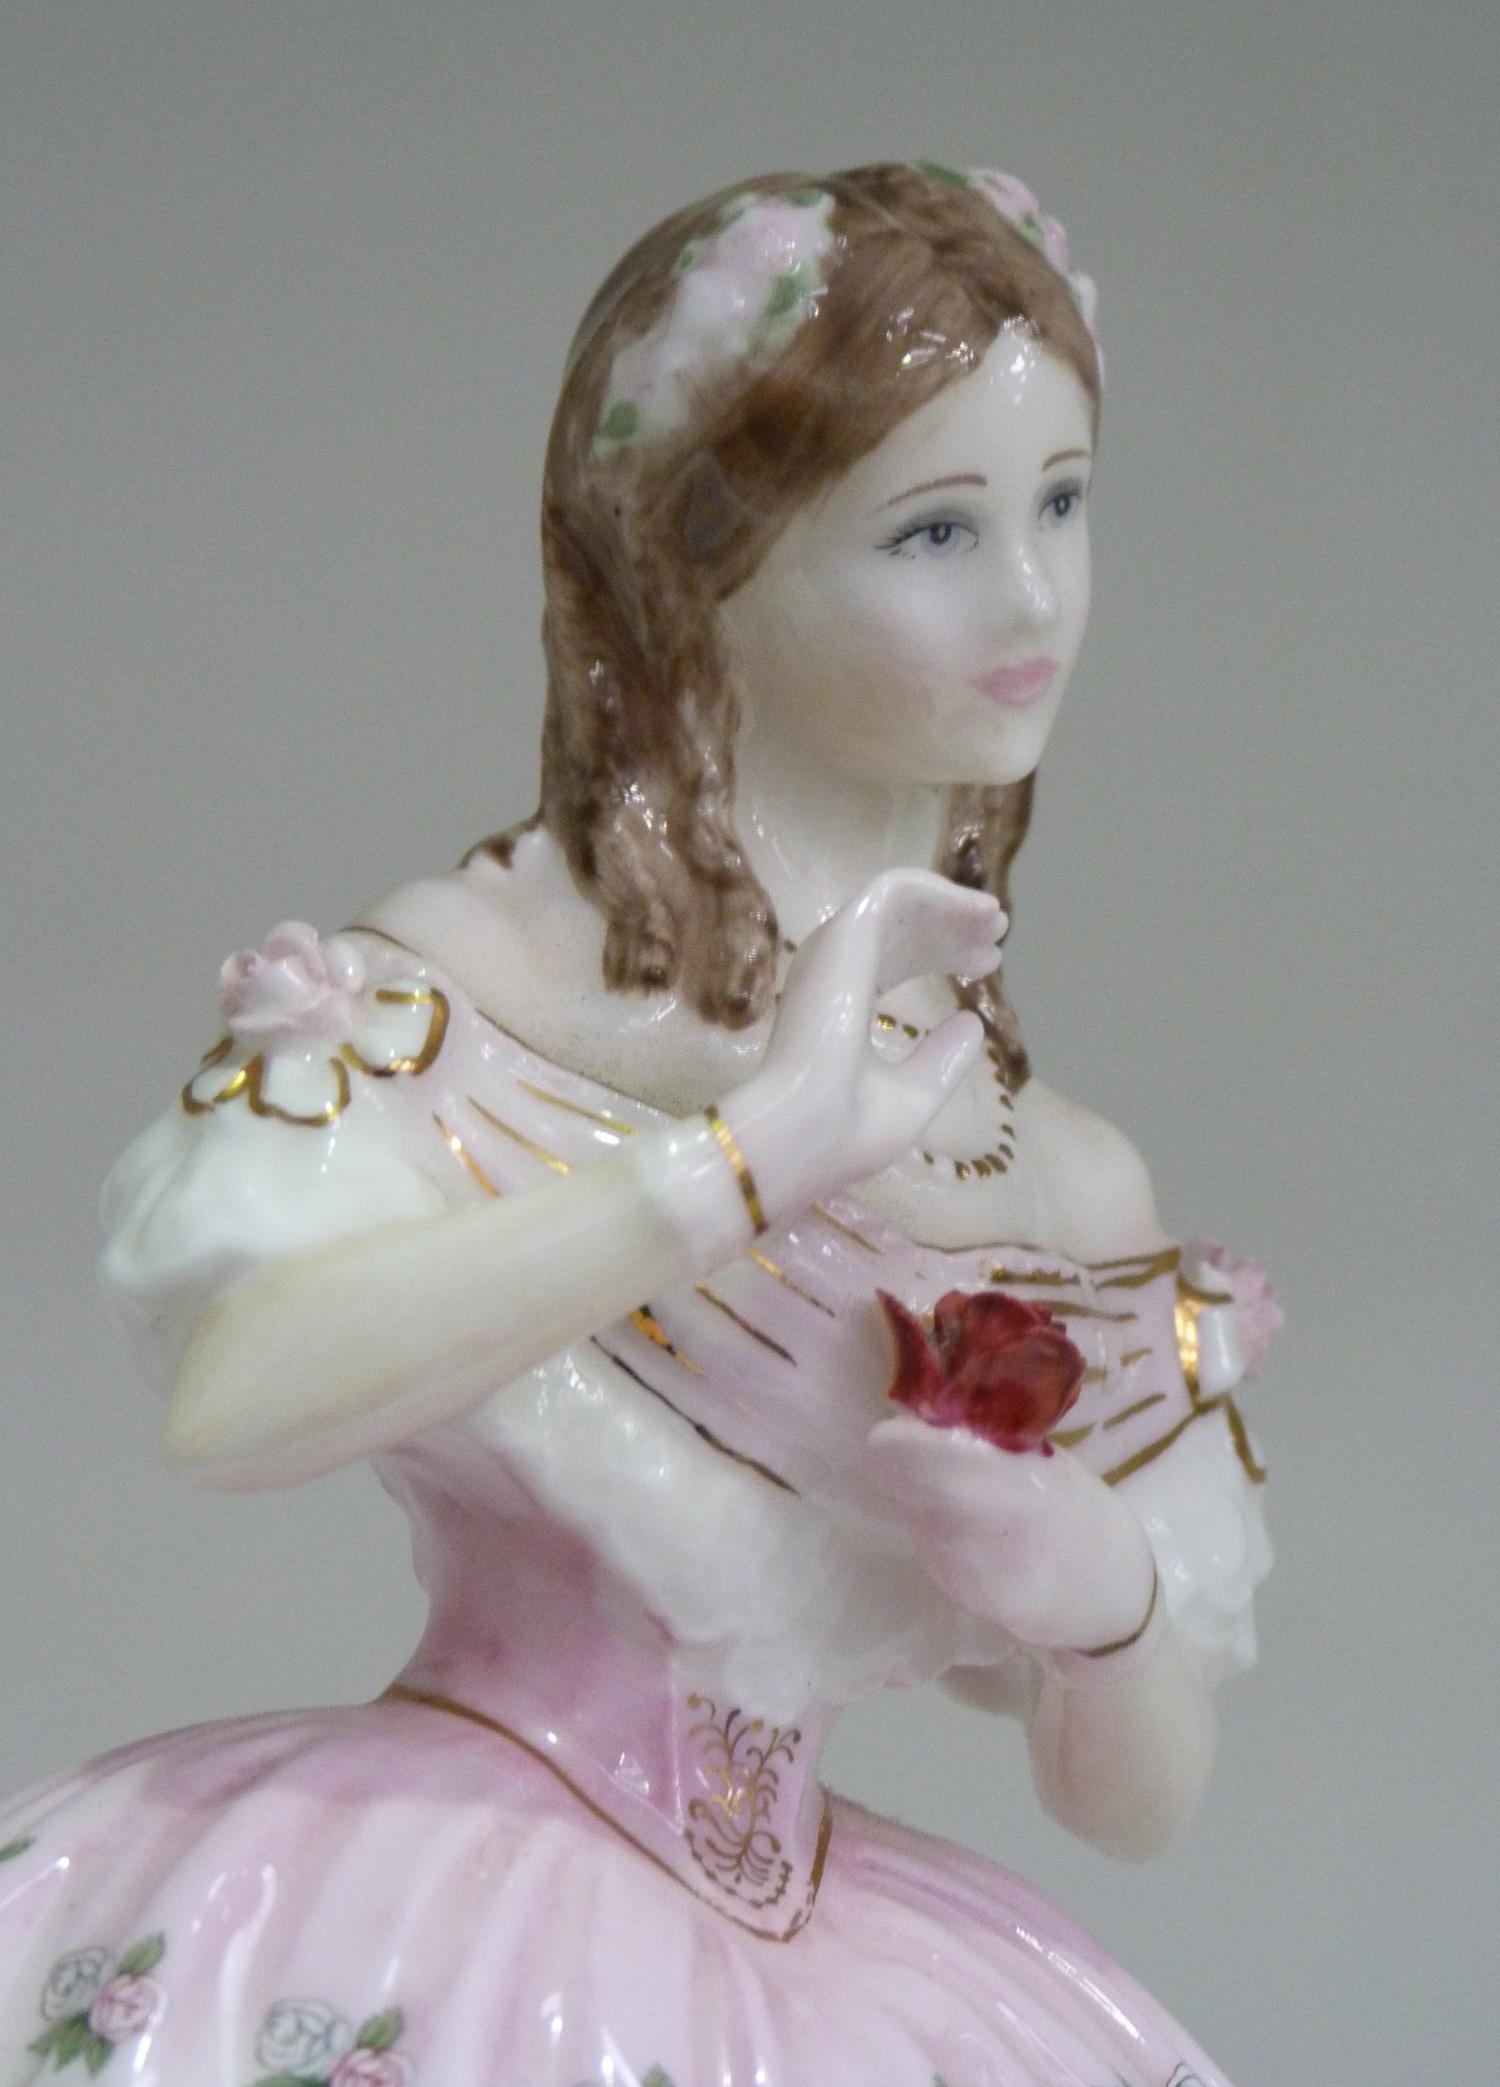 This is a Timed Online Auction on Bidspotter.co.uk, Click here to bid. Royal Doulton 'Red Red - Image 3 of 3